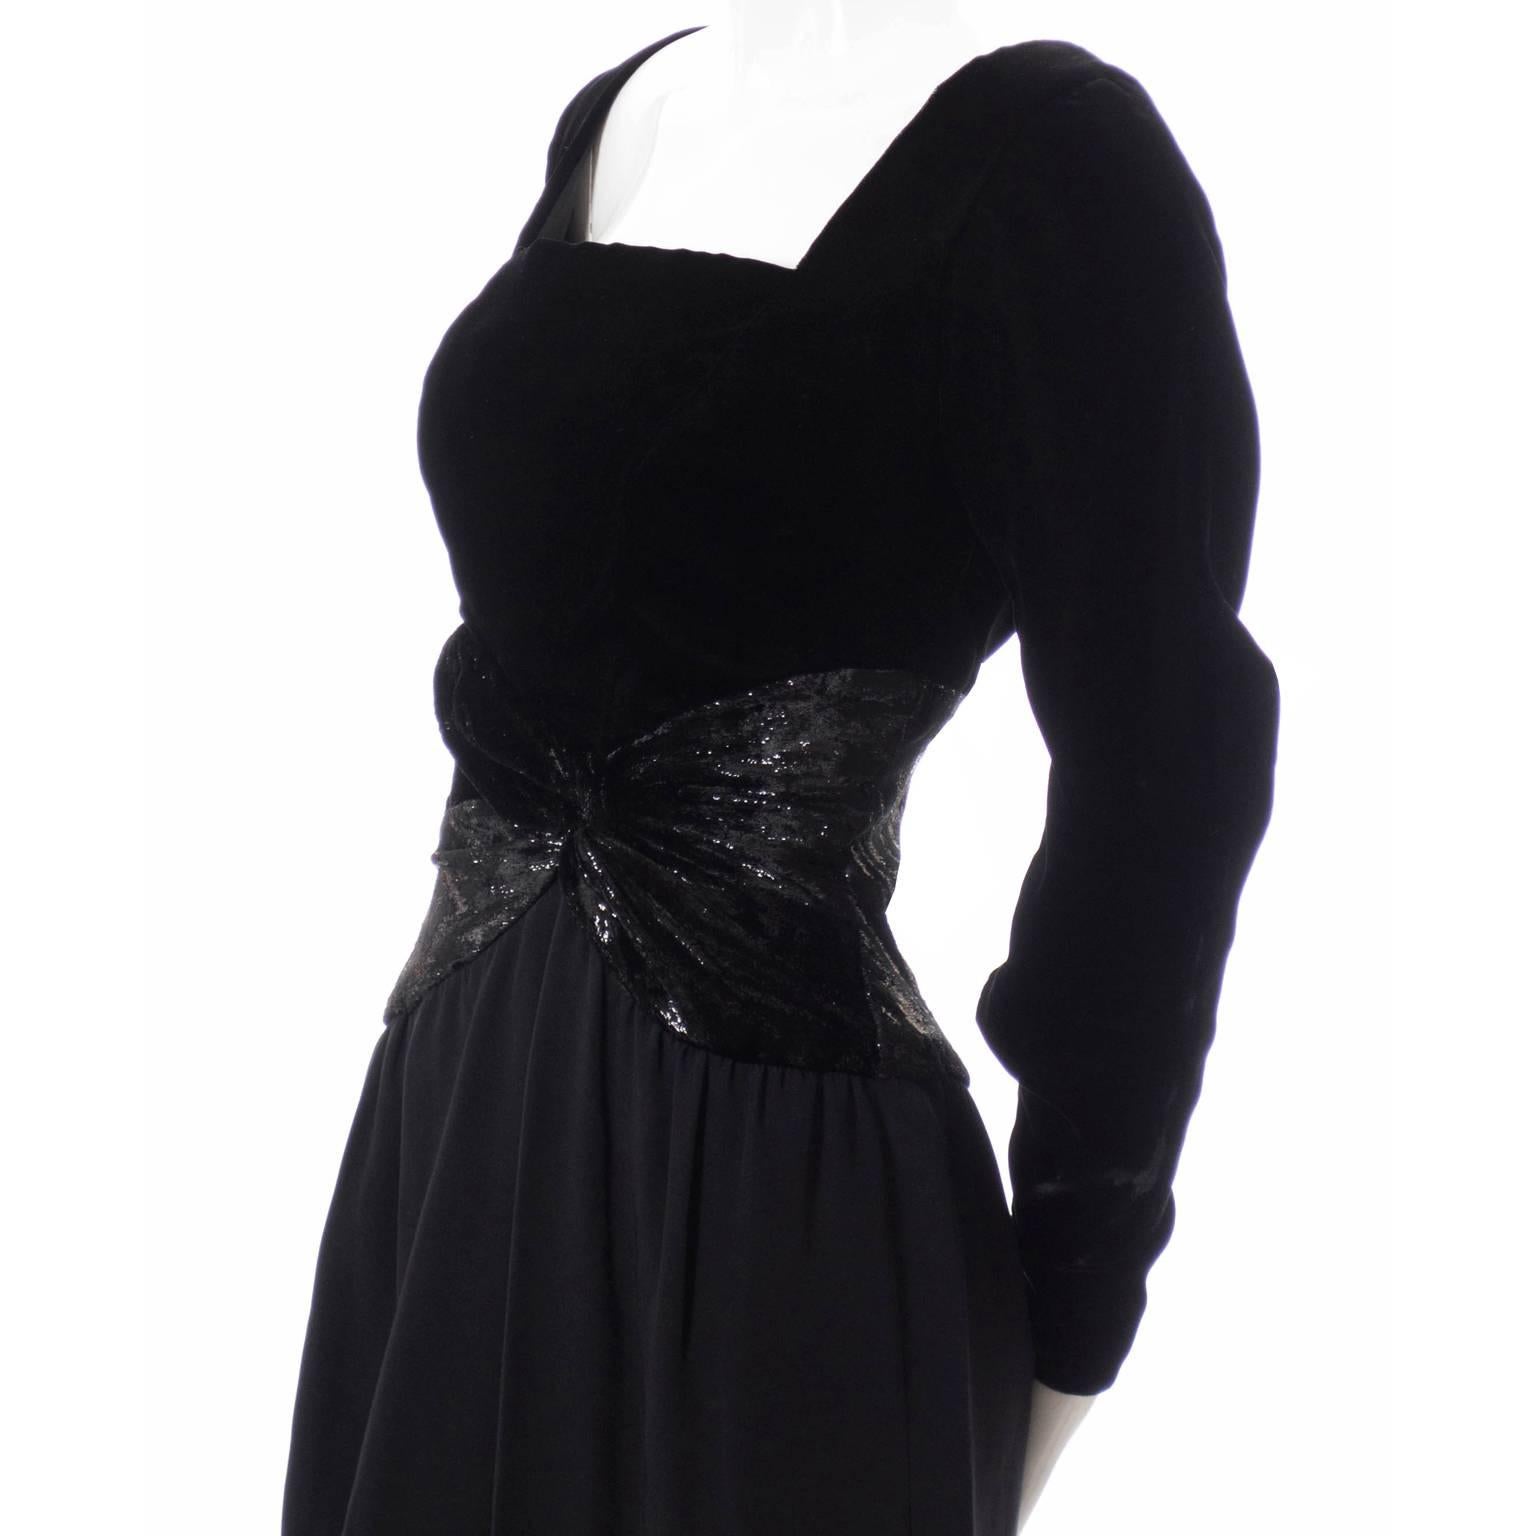 This vintage 1980'S Bob Mackie vintage dress has a velvet bodice and a silk crepe skirt with a metallic velvet waistband. The dress has a square neckline, back zipper and is in excellent condition. A great classic from one of the most defining